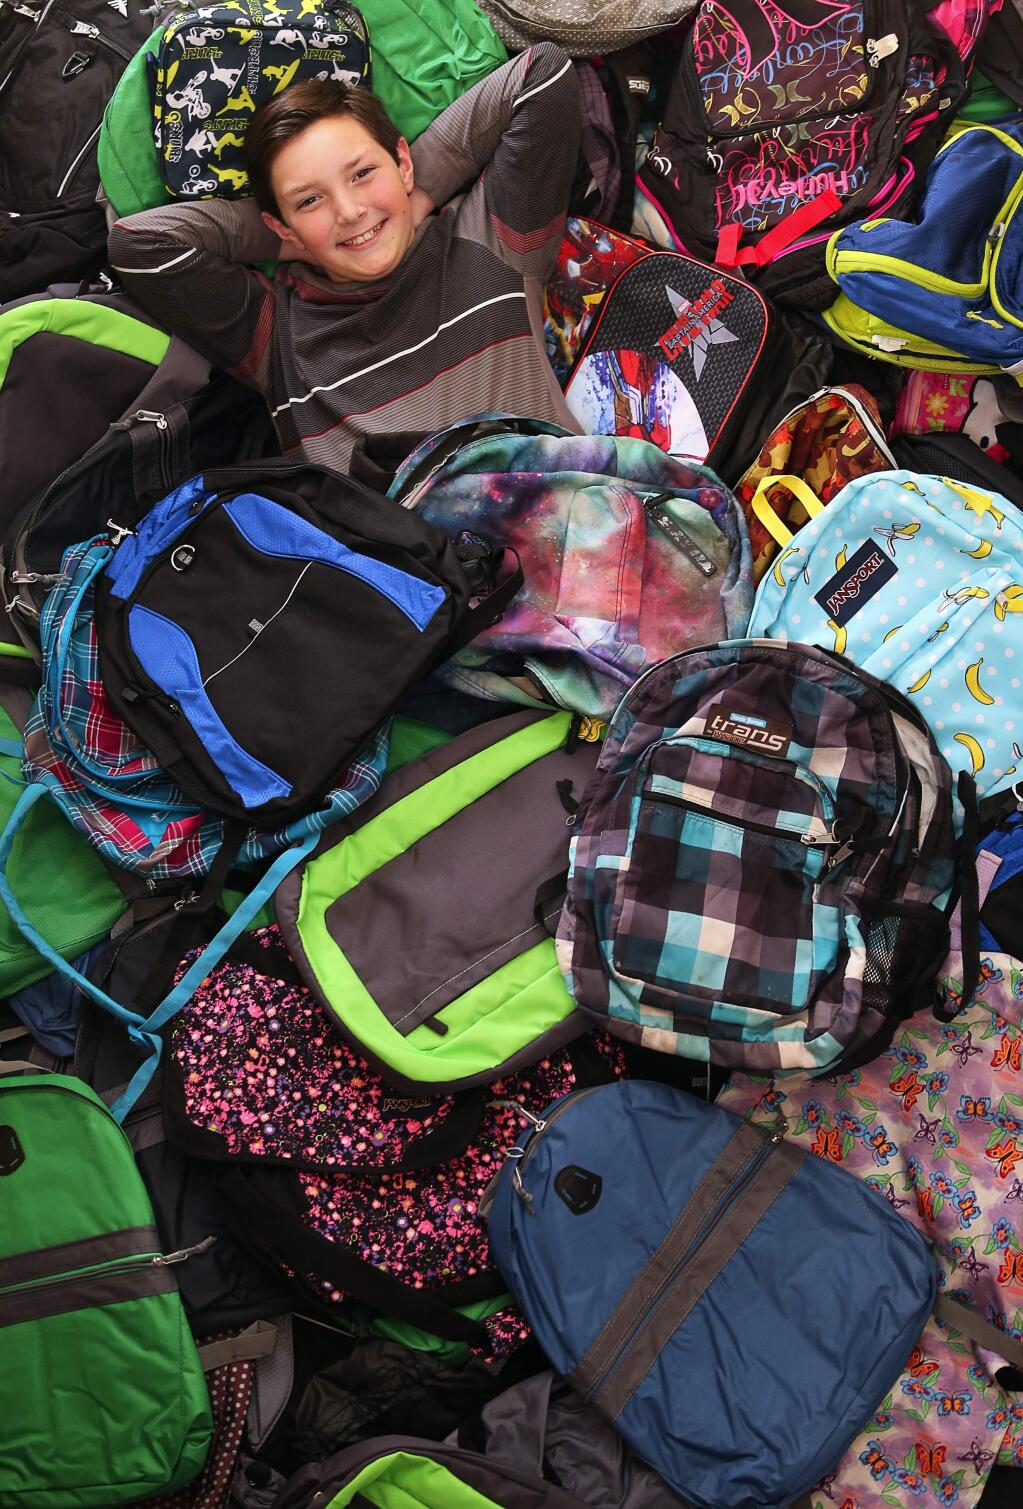 Ryan Caparros, 11, visited Costa Rica and promised to send 50 backpacks to needy schoolchildren. A collection drive he started at school garnered 350 backpacks. Unfortunately, 300 were stolen. After restarting the effort, Ryan is back up to 180 backpacks, in addition to donated money. His new goal is to send 400 backpacks to the Costa Rican schoolchildren.(Christopher Chung/ The Press Democrat)